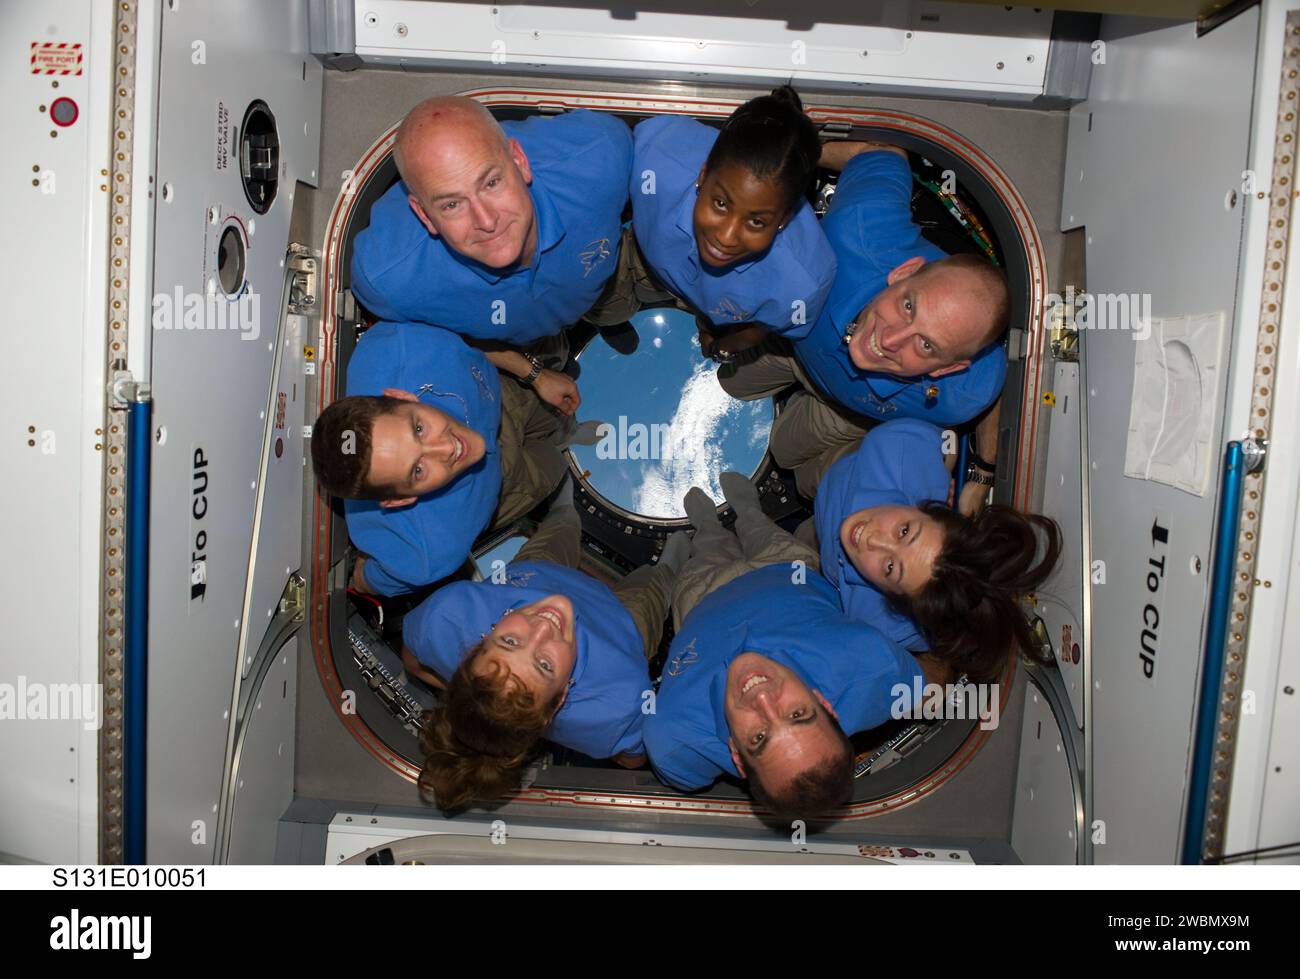 S131-E-010051 (14 April 2010) --- The STS-131 crew members pose for a portrait in the Cupola of the International Space Station while space shuttle Discovery remains docked with the station. Pictured counter-clockwise (from top left) are NASA astronauts Alan Poindexter, commander; James P. Dutton Jr., pilot; Dorothy Metcalf-Lindenburger, Rick Mastracchio, Japan Aerospace Exploration Agency (JAXA) astronaut Naoko Yamazaki, NASA astronauts Clayton Anderson and Stephanie Wilson, all mission specialists. Stock Photo